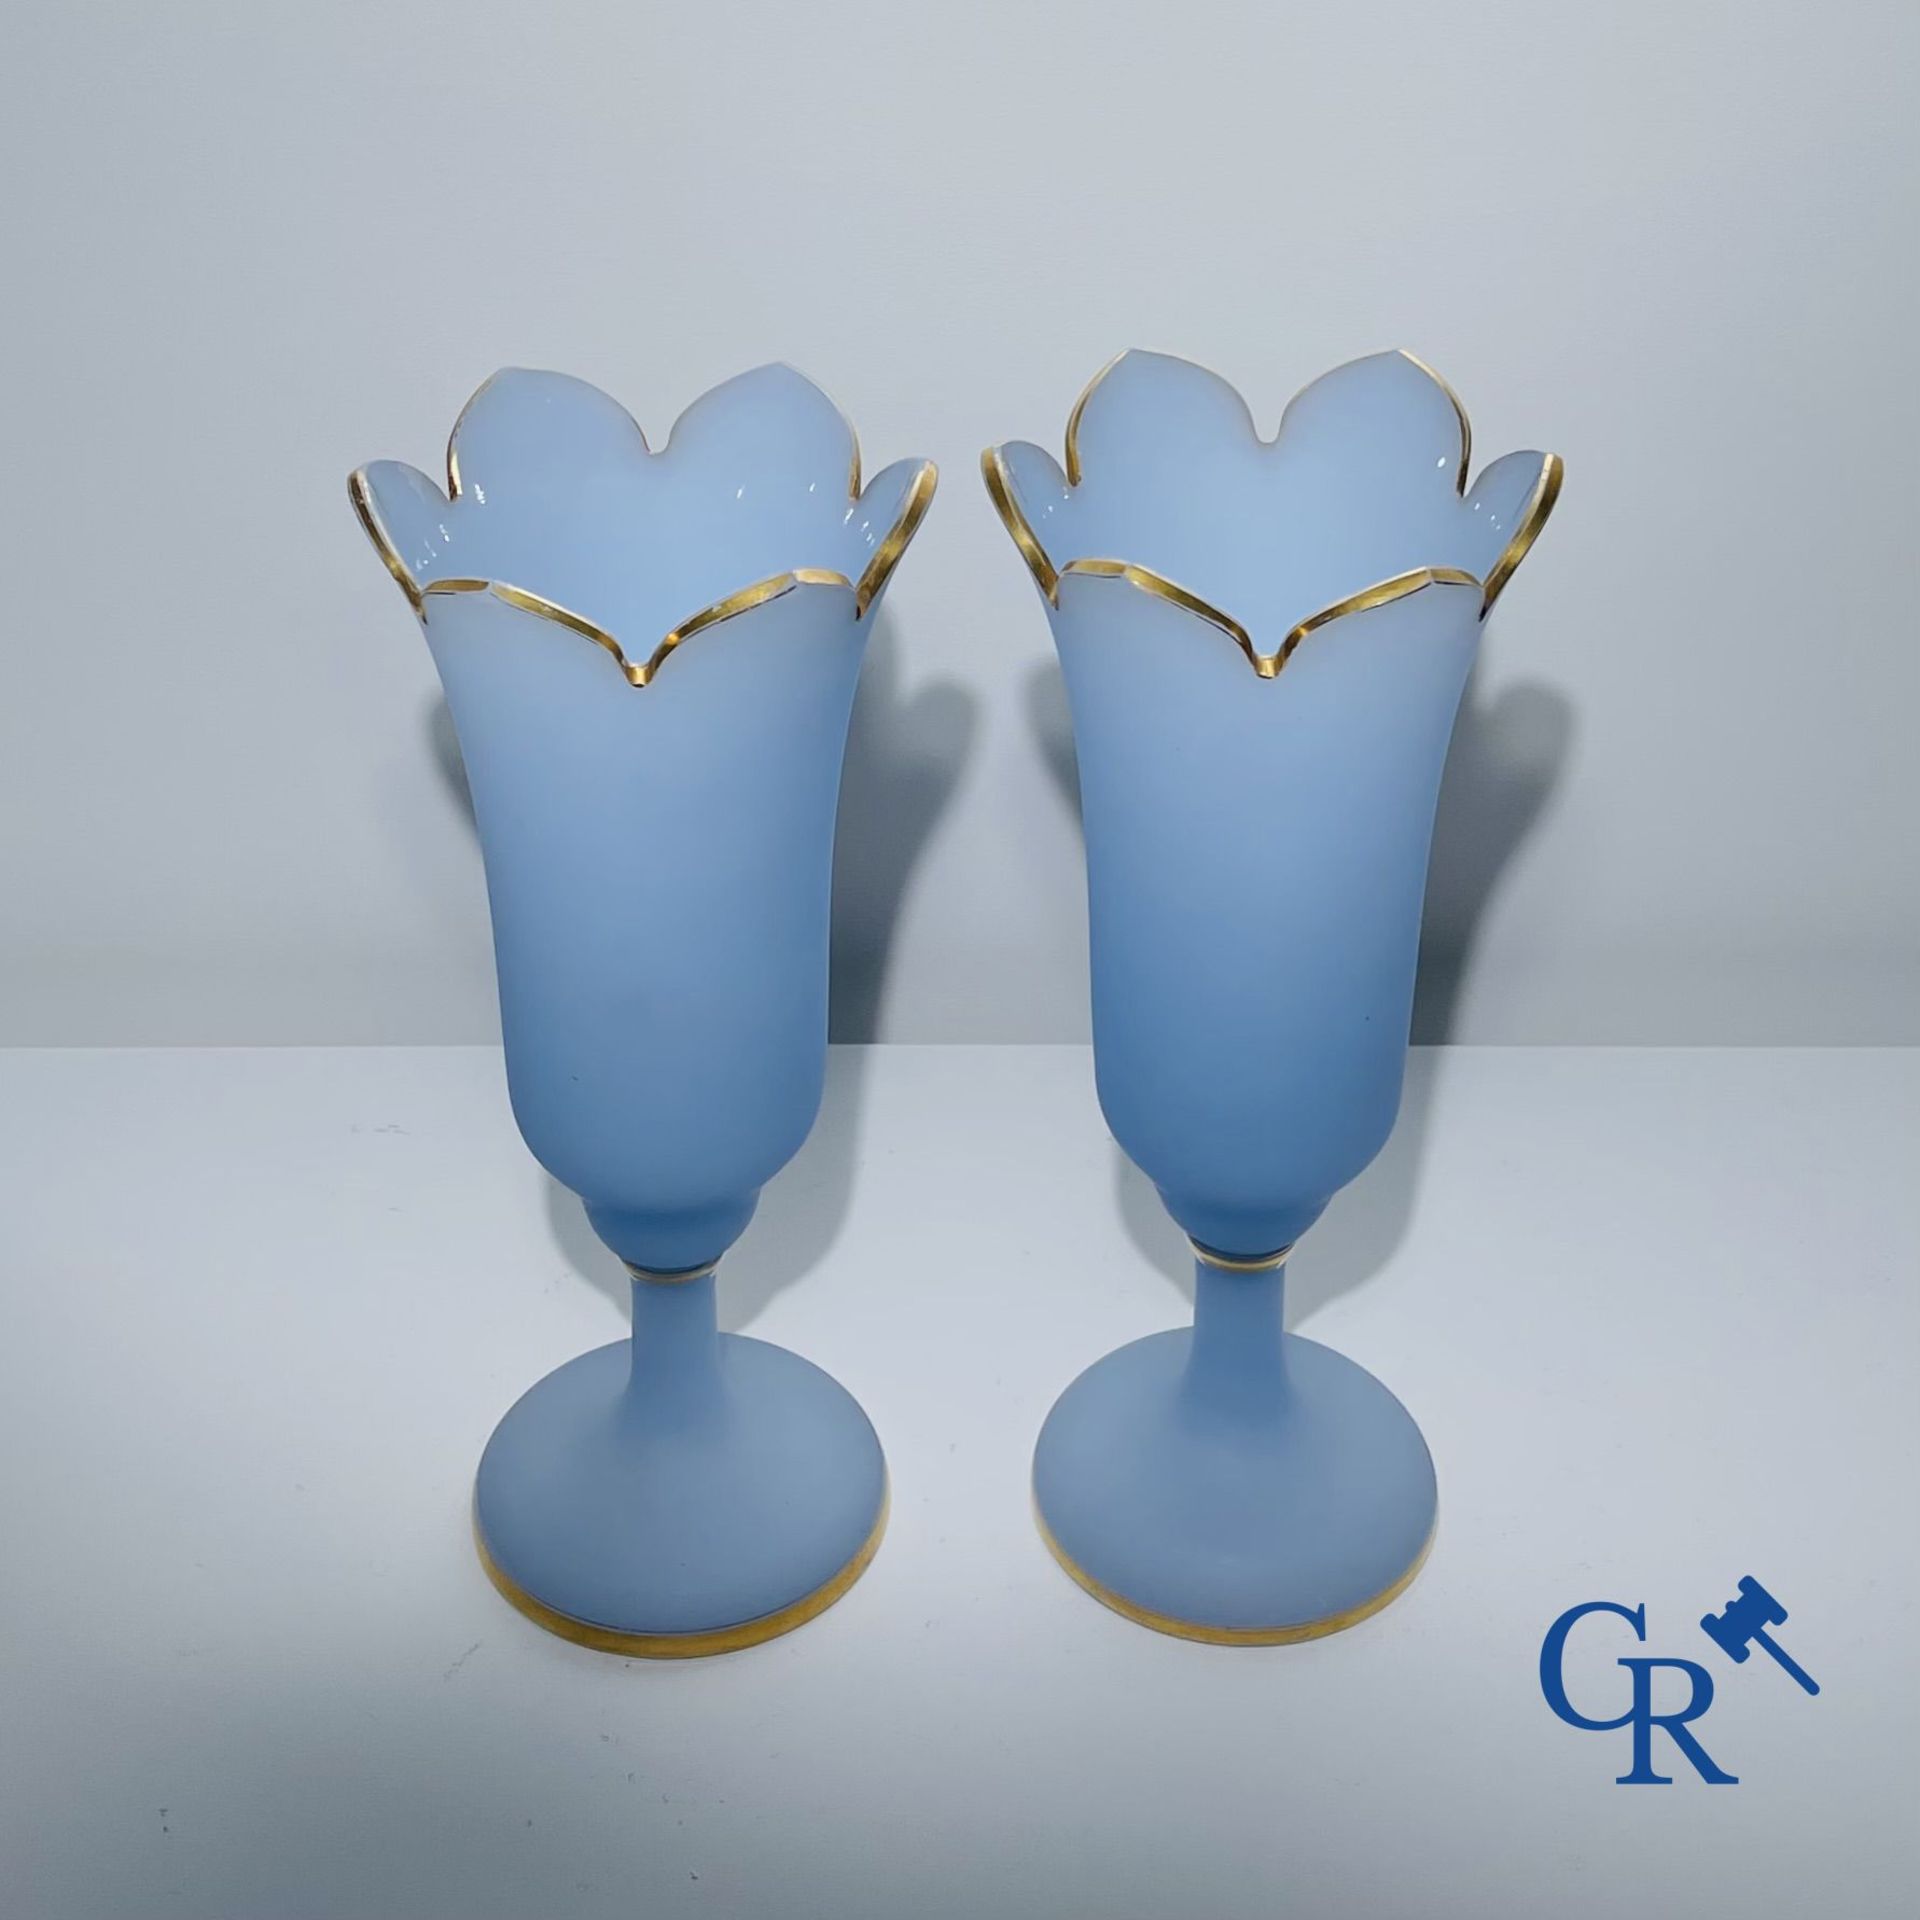 Baccarat: Pair of vases in opaline with gilding. - Image 2 of 4